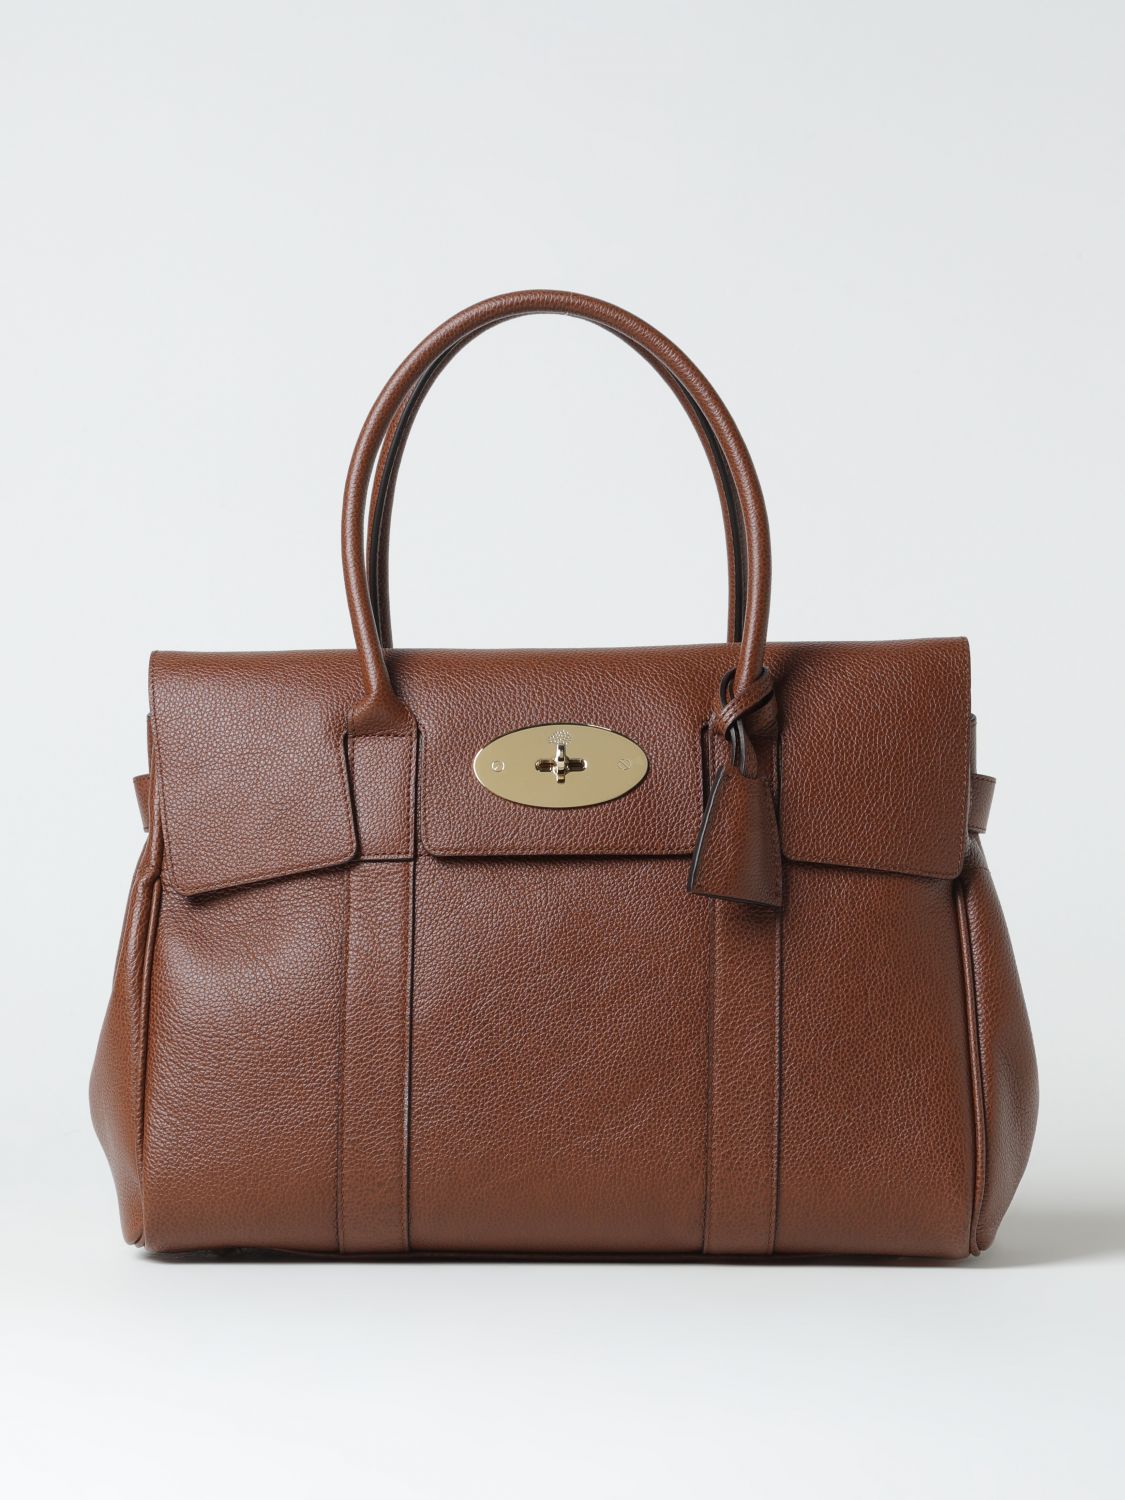 Borsa Bayswater Mulberry in pelle con charm